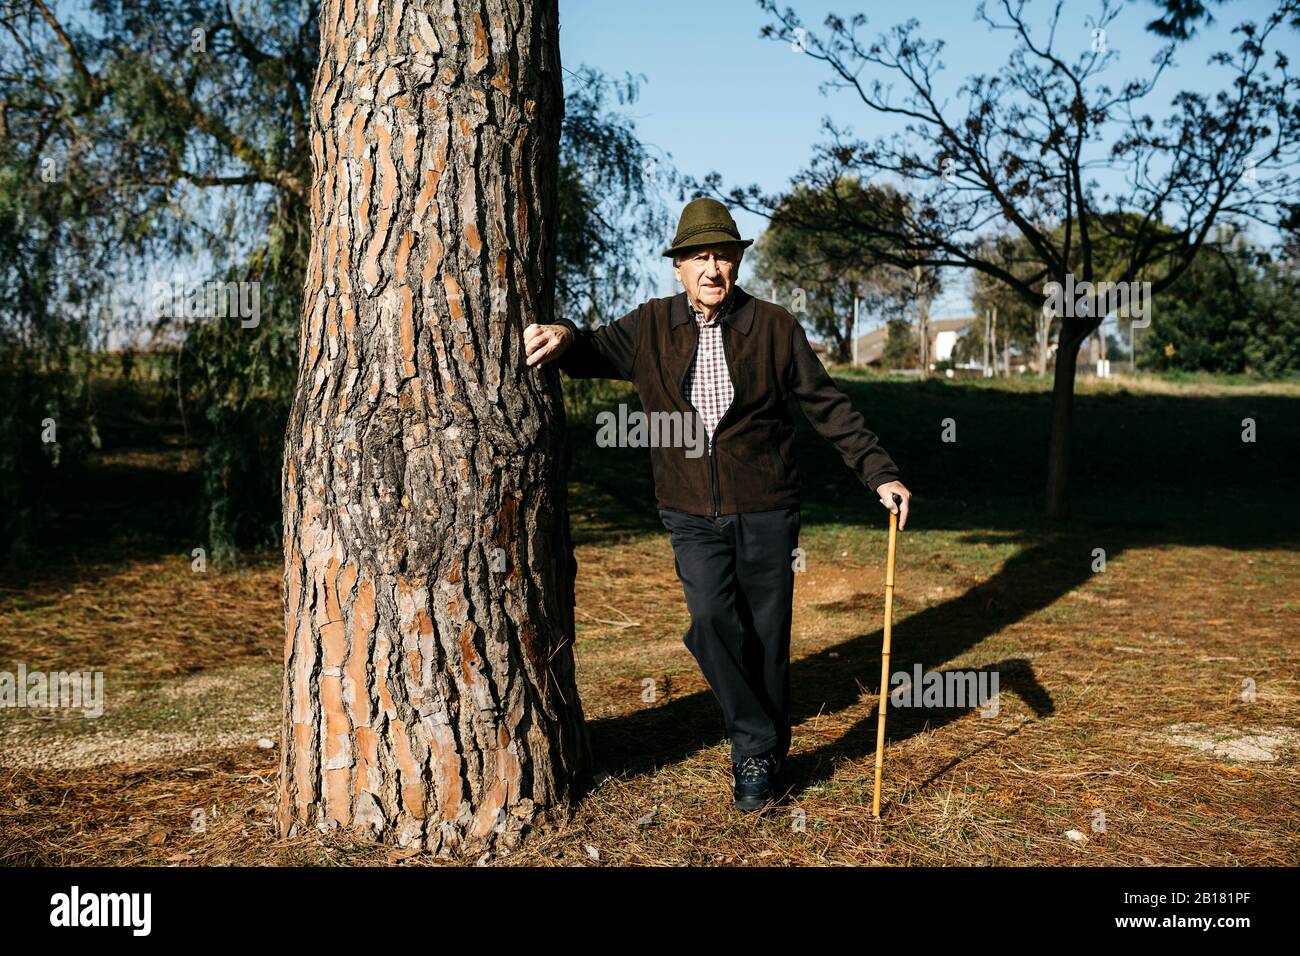 Old man with cane, leaning on tree in park Stock Photo